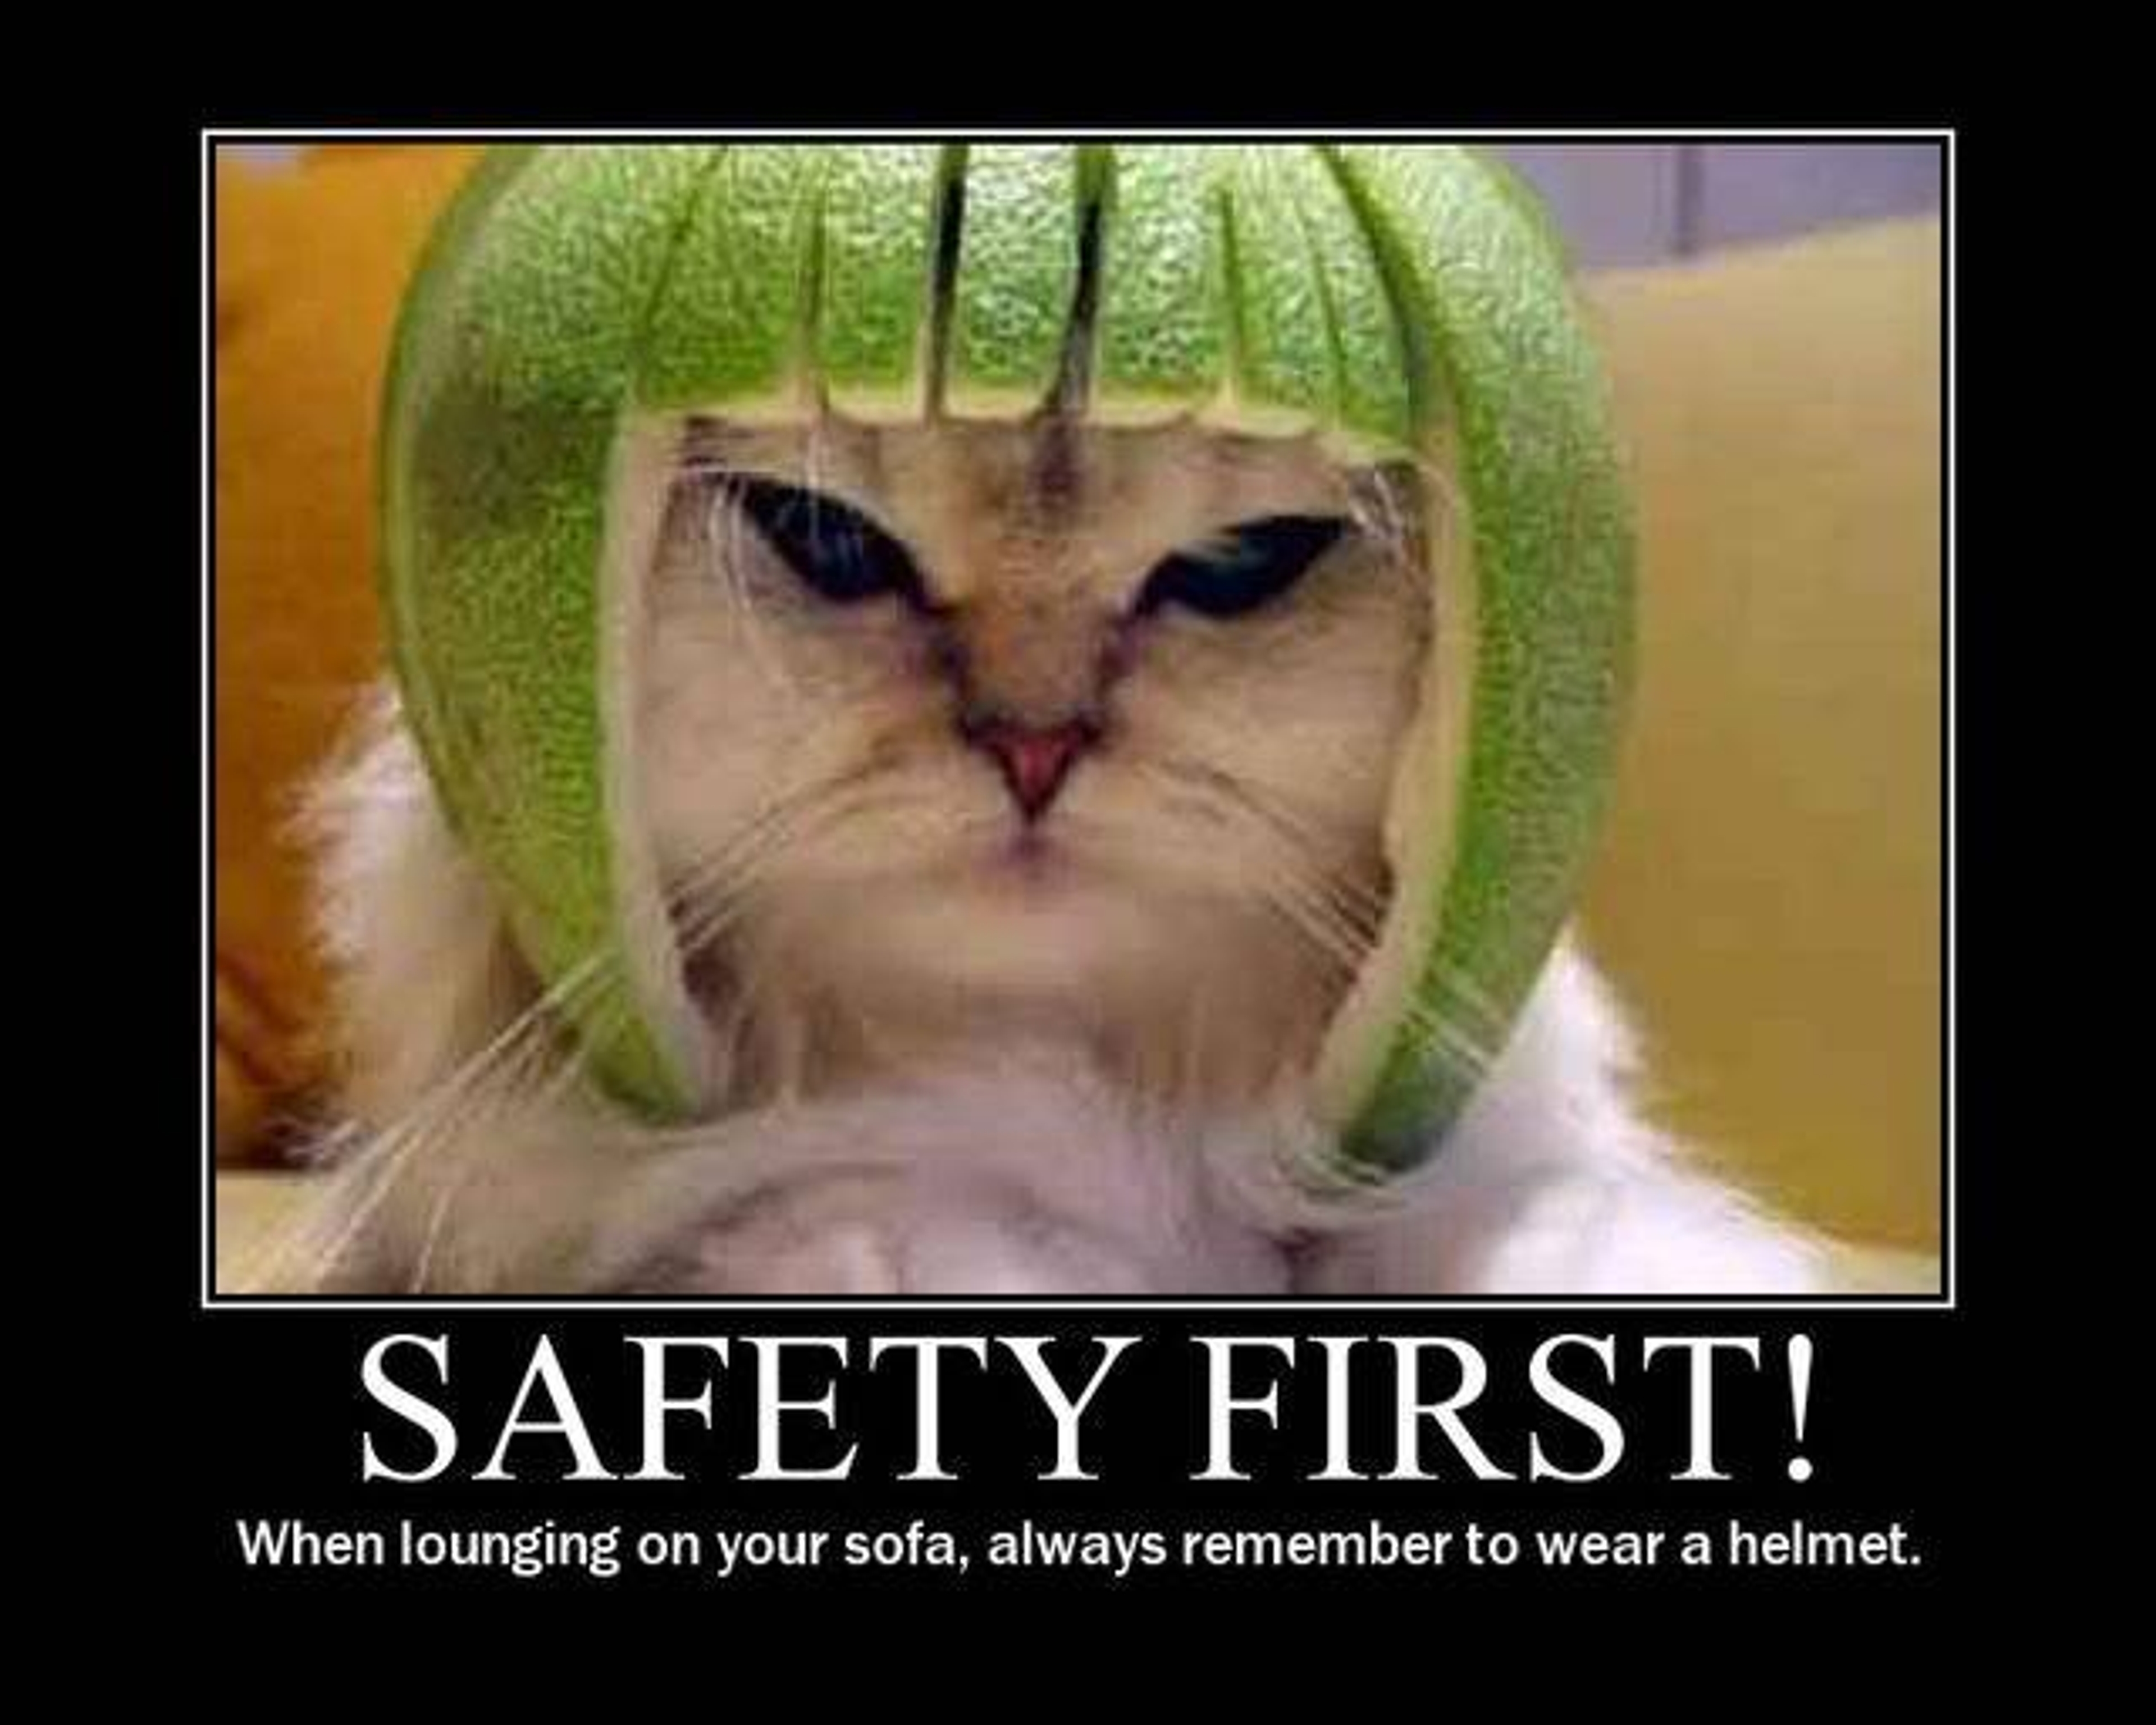 A cat wearing a grapefruit helmet with the label "Safety first! When lounging on your sofa, always remember to wear a helmet."